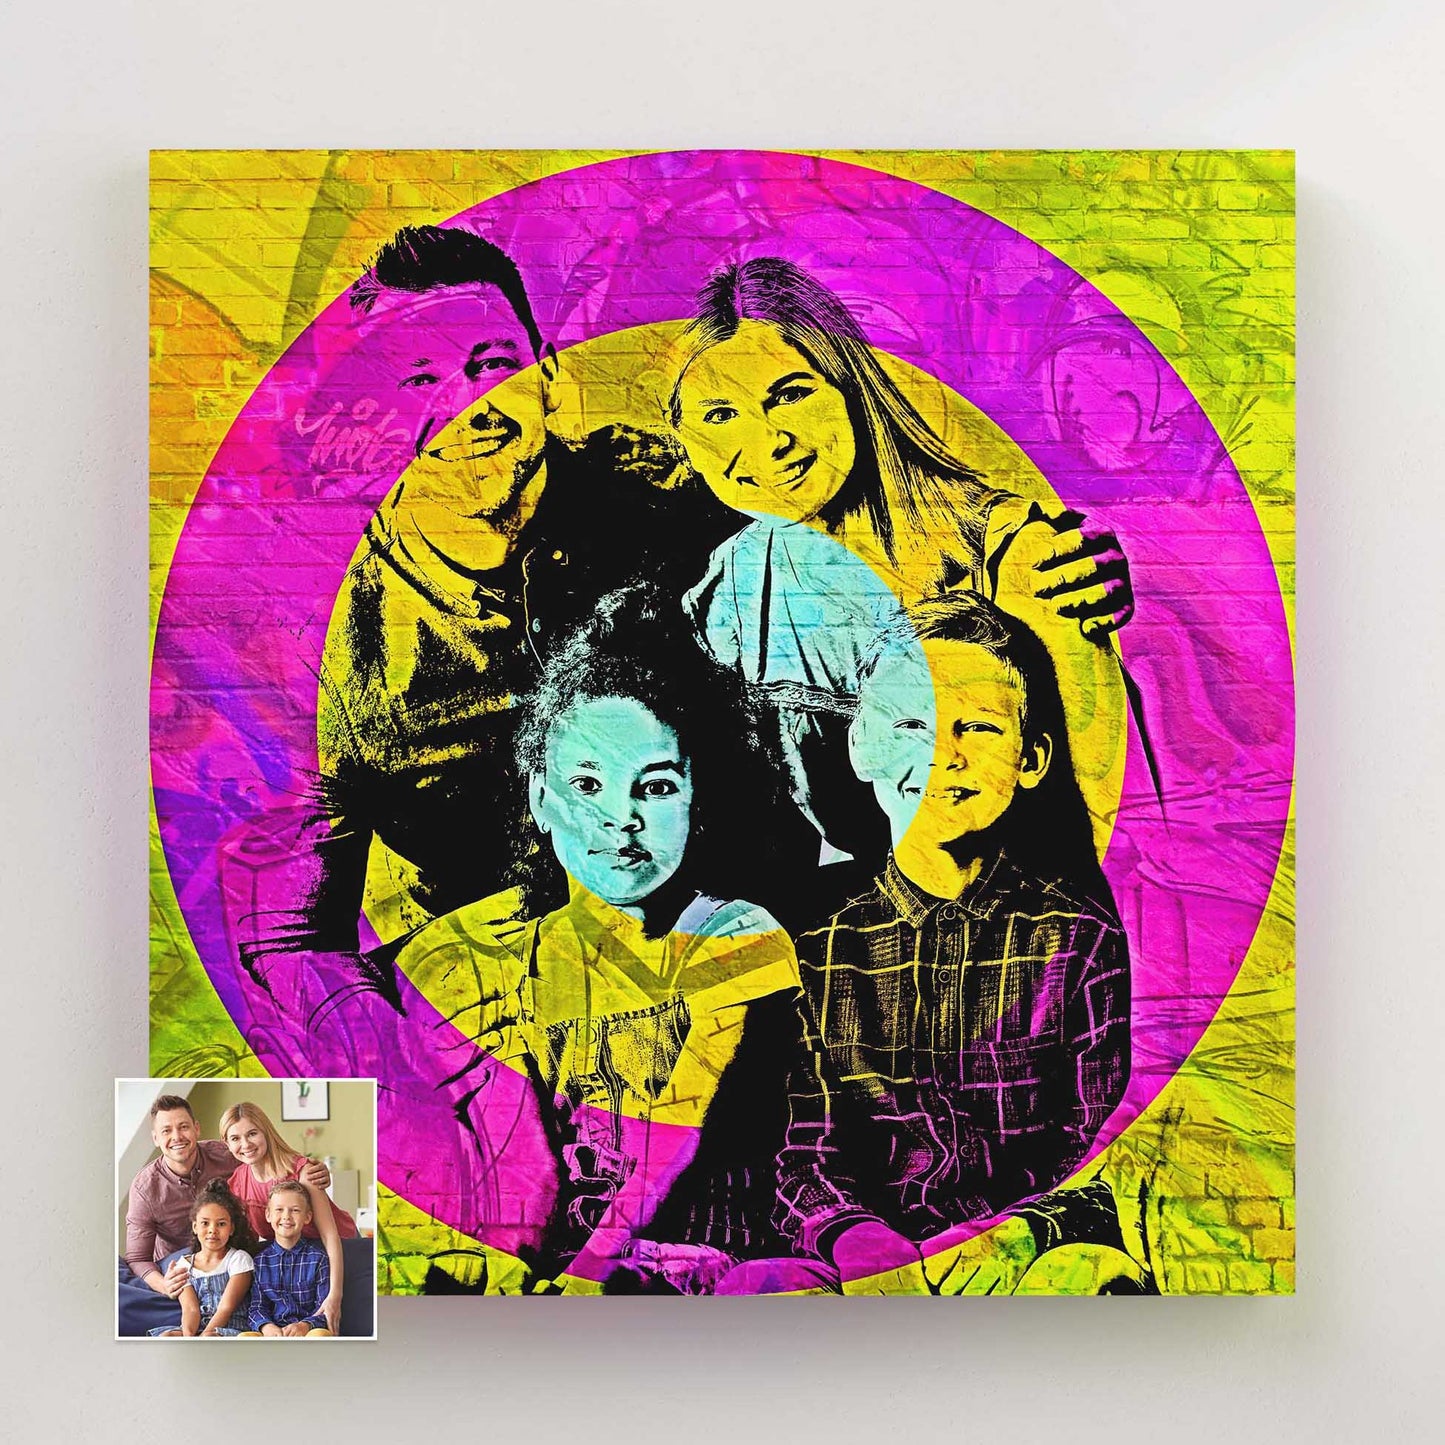 Make a bold statement with our Personalised Graffiti Street Art Canvas. Its urban, fun, and colorful designs create an atmosphere of excitement and creativity. Handcrafted on woven canvas and printed from your photo